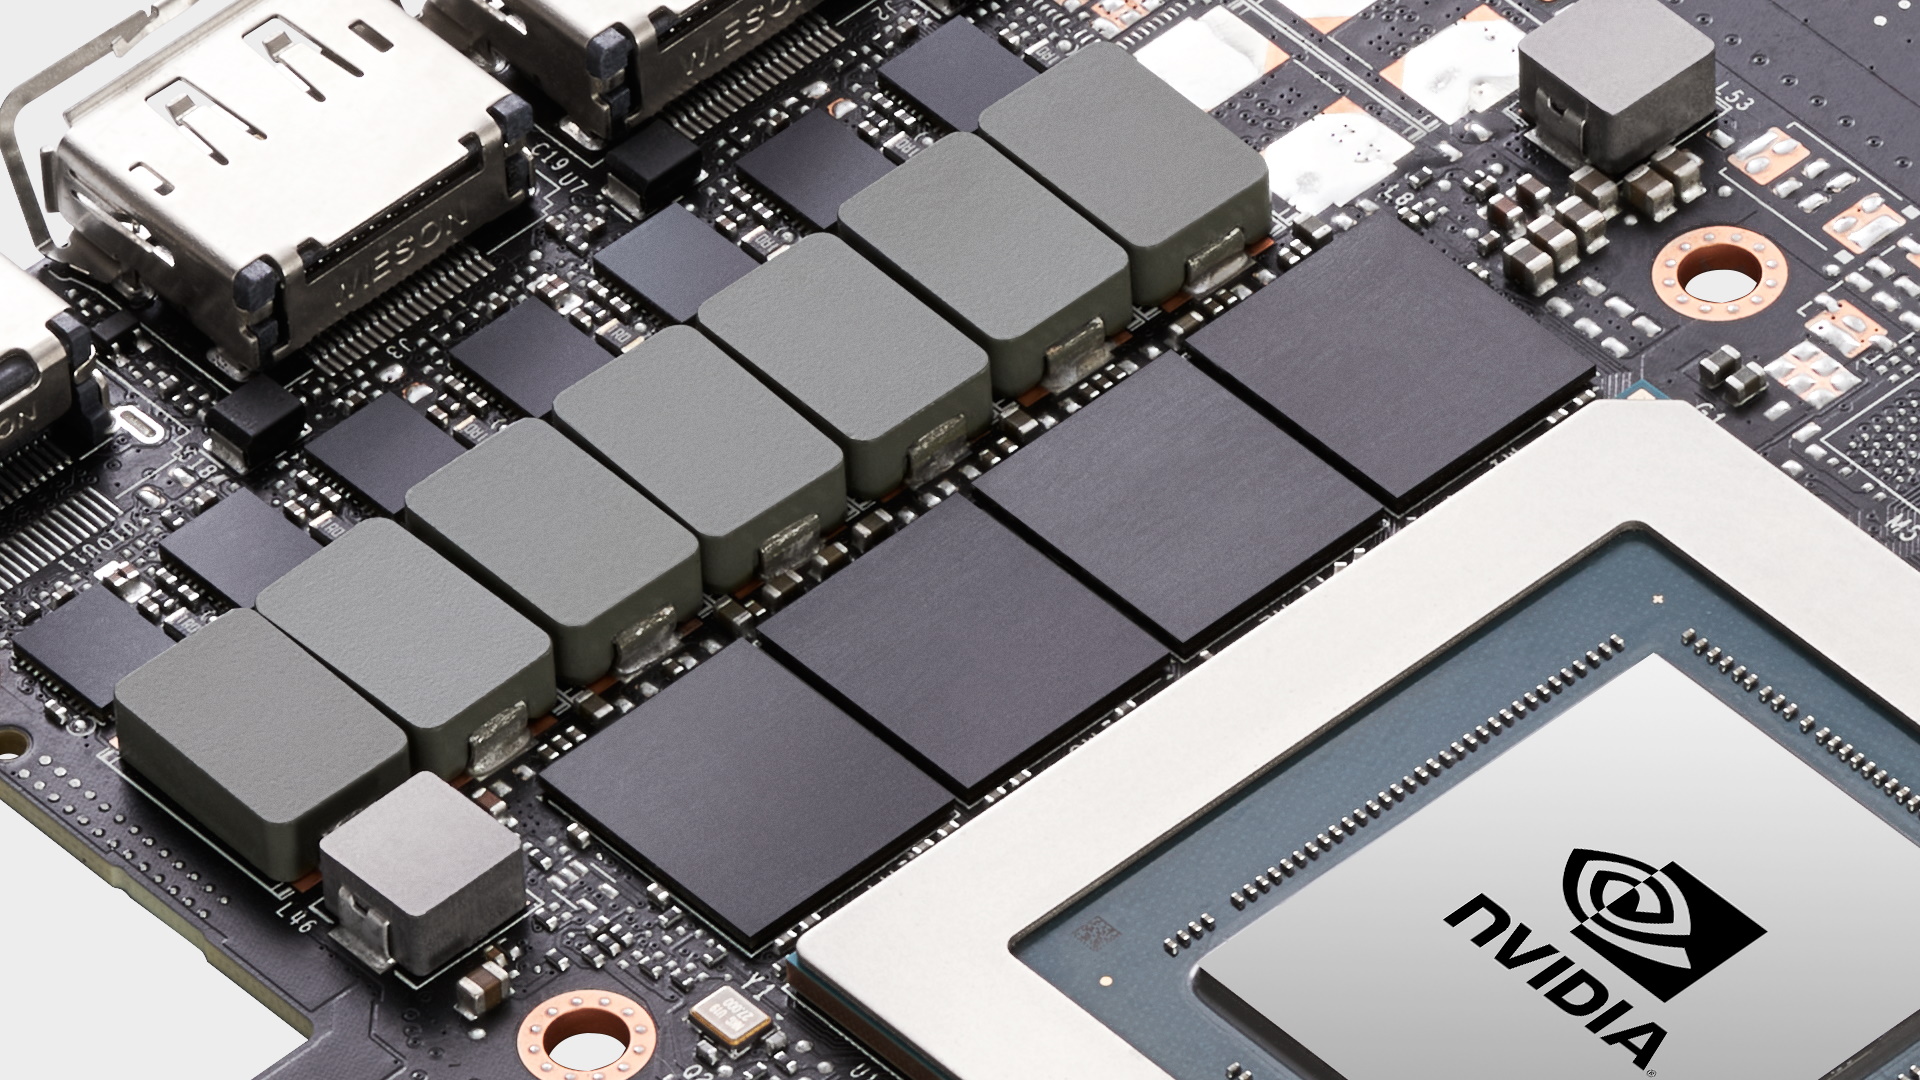  Fresh rumours claim Nvidia's next-gen Blackwell cards won't have a wider memory bus or more VRAM—apart from the RTX 5090 